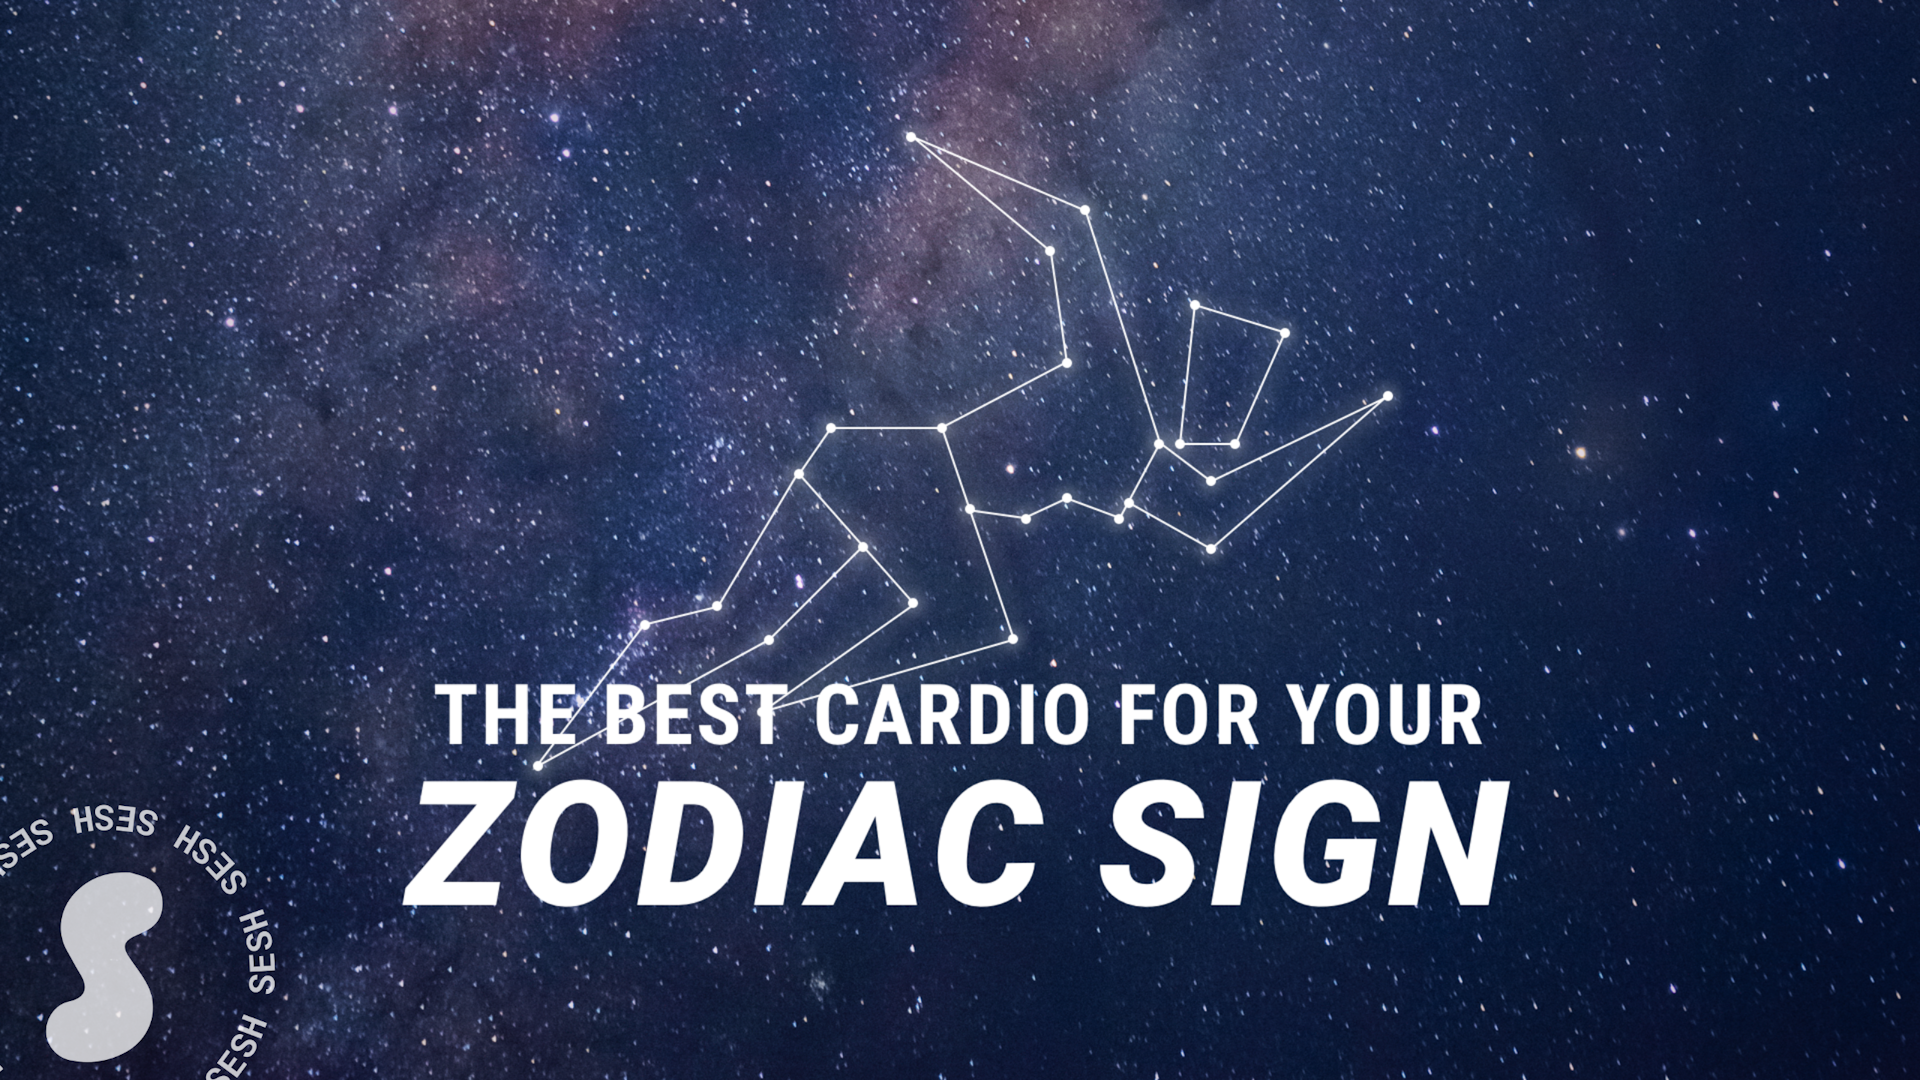 The Best Cardio Workout For Your Zodiac Sign